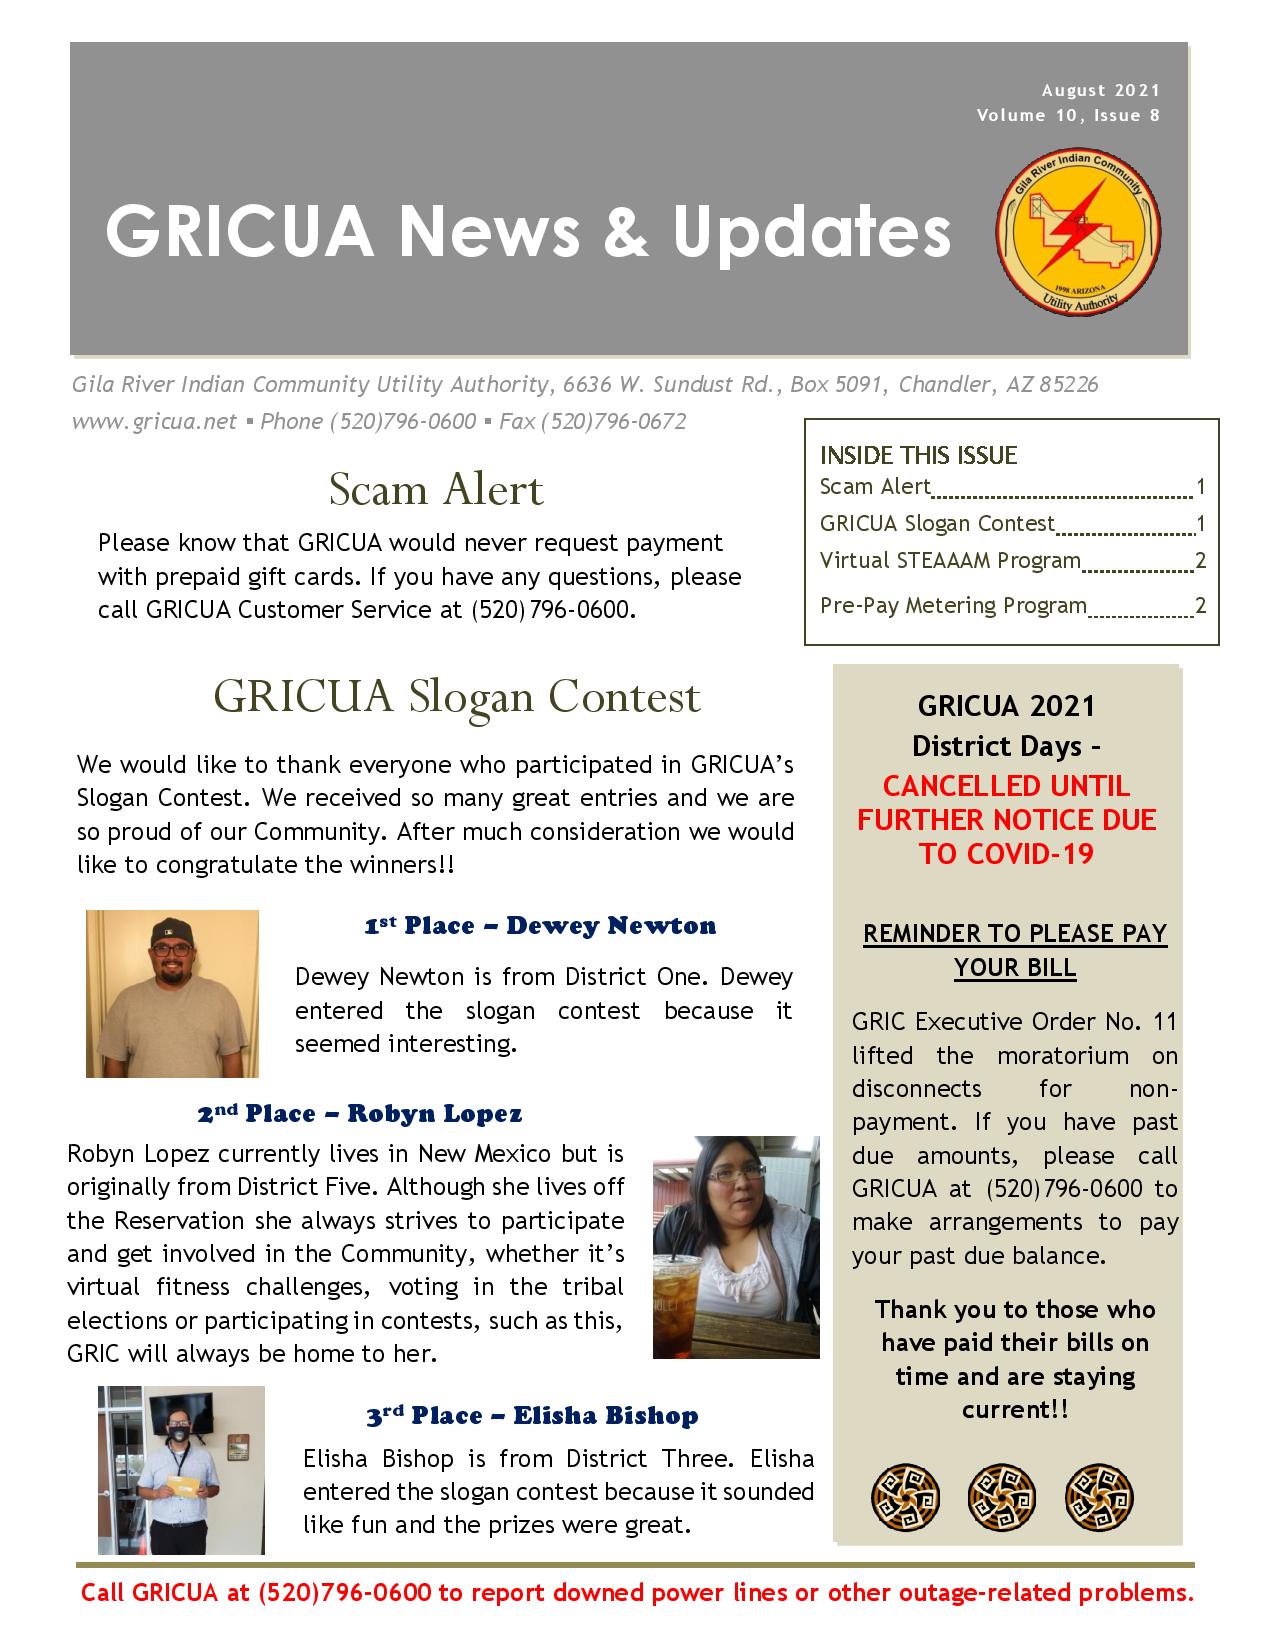 August 2021 newsletter page 1